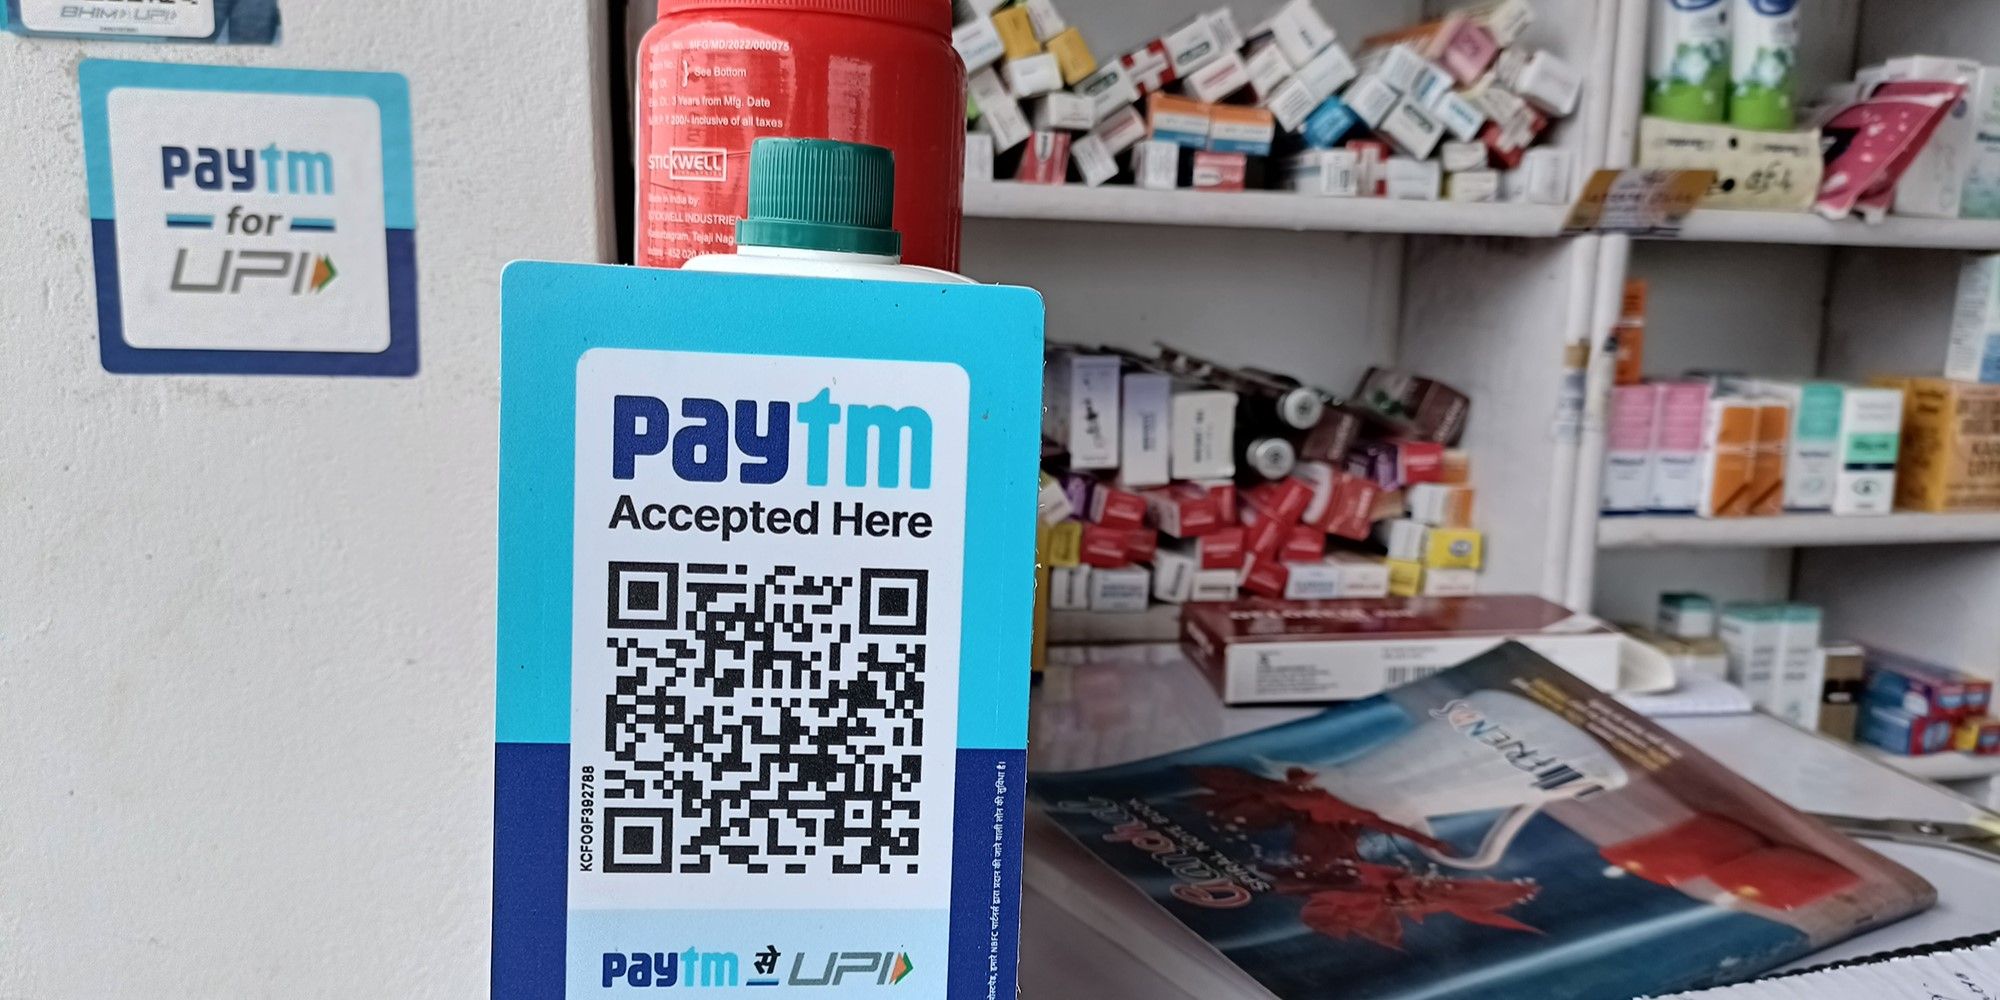 Startup founders urge PM, FinMin to rollback sanctions on Paytm Payments Bank: Report
